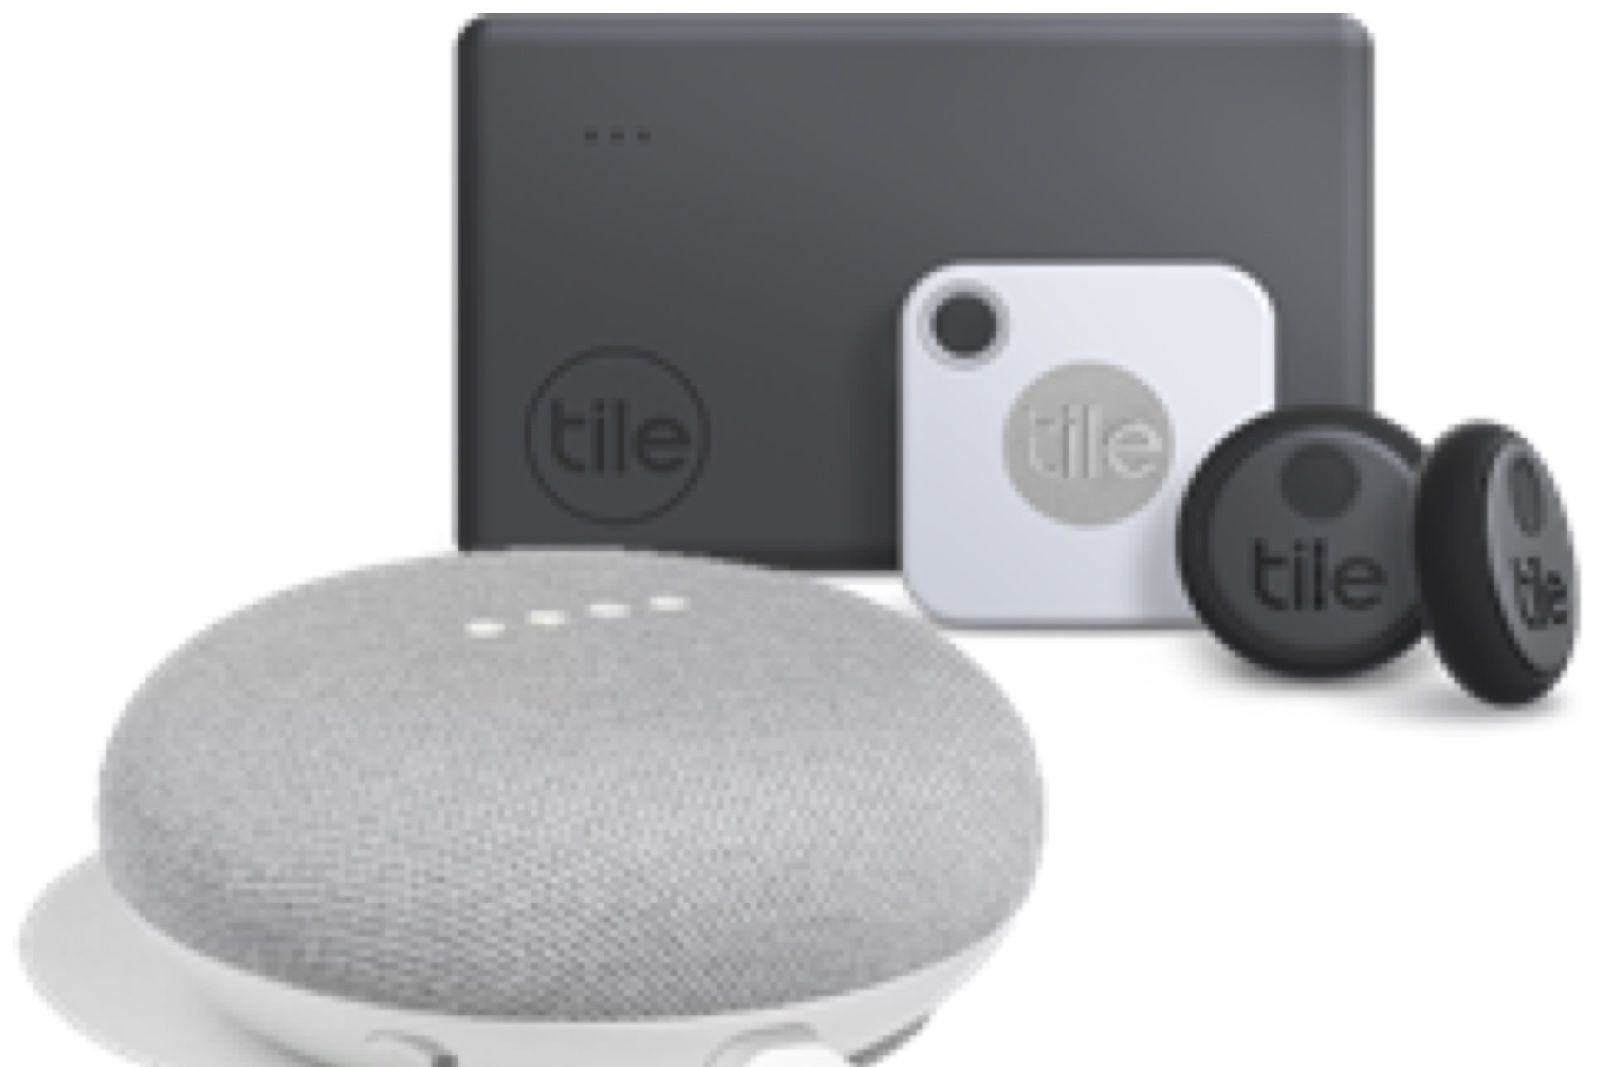 Get a Tile and Google Nest Mini bundle for less with this Argos deal image 1